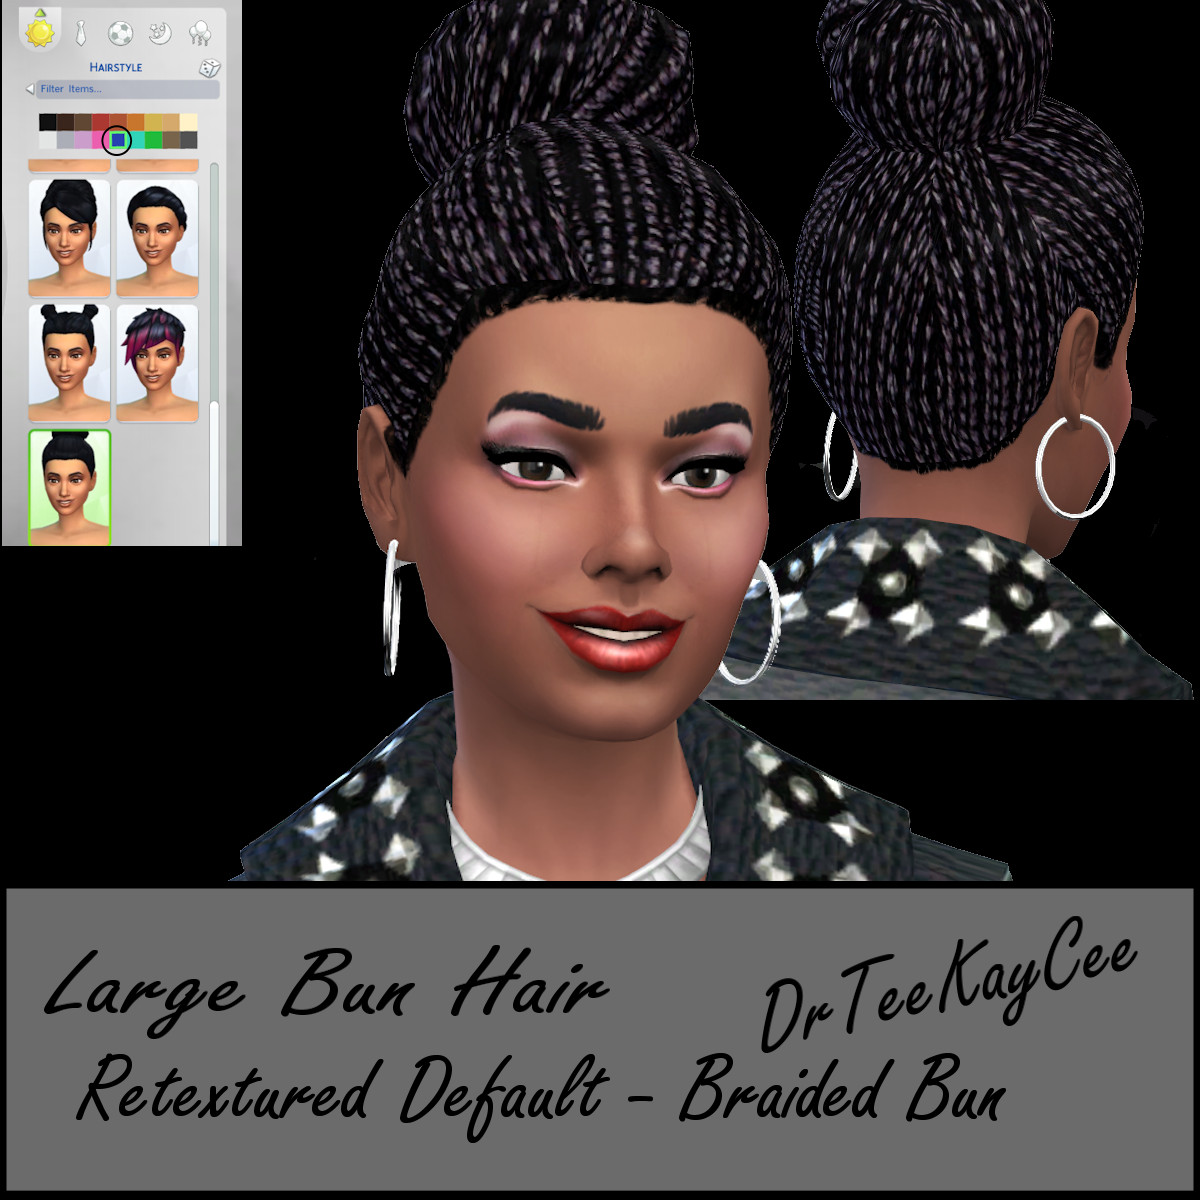 Black Hairstyles Sims 4
 Another cool Ethnic Hairstyle for the Sims 4 Sim